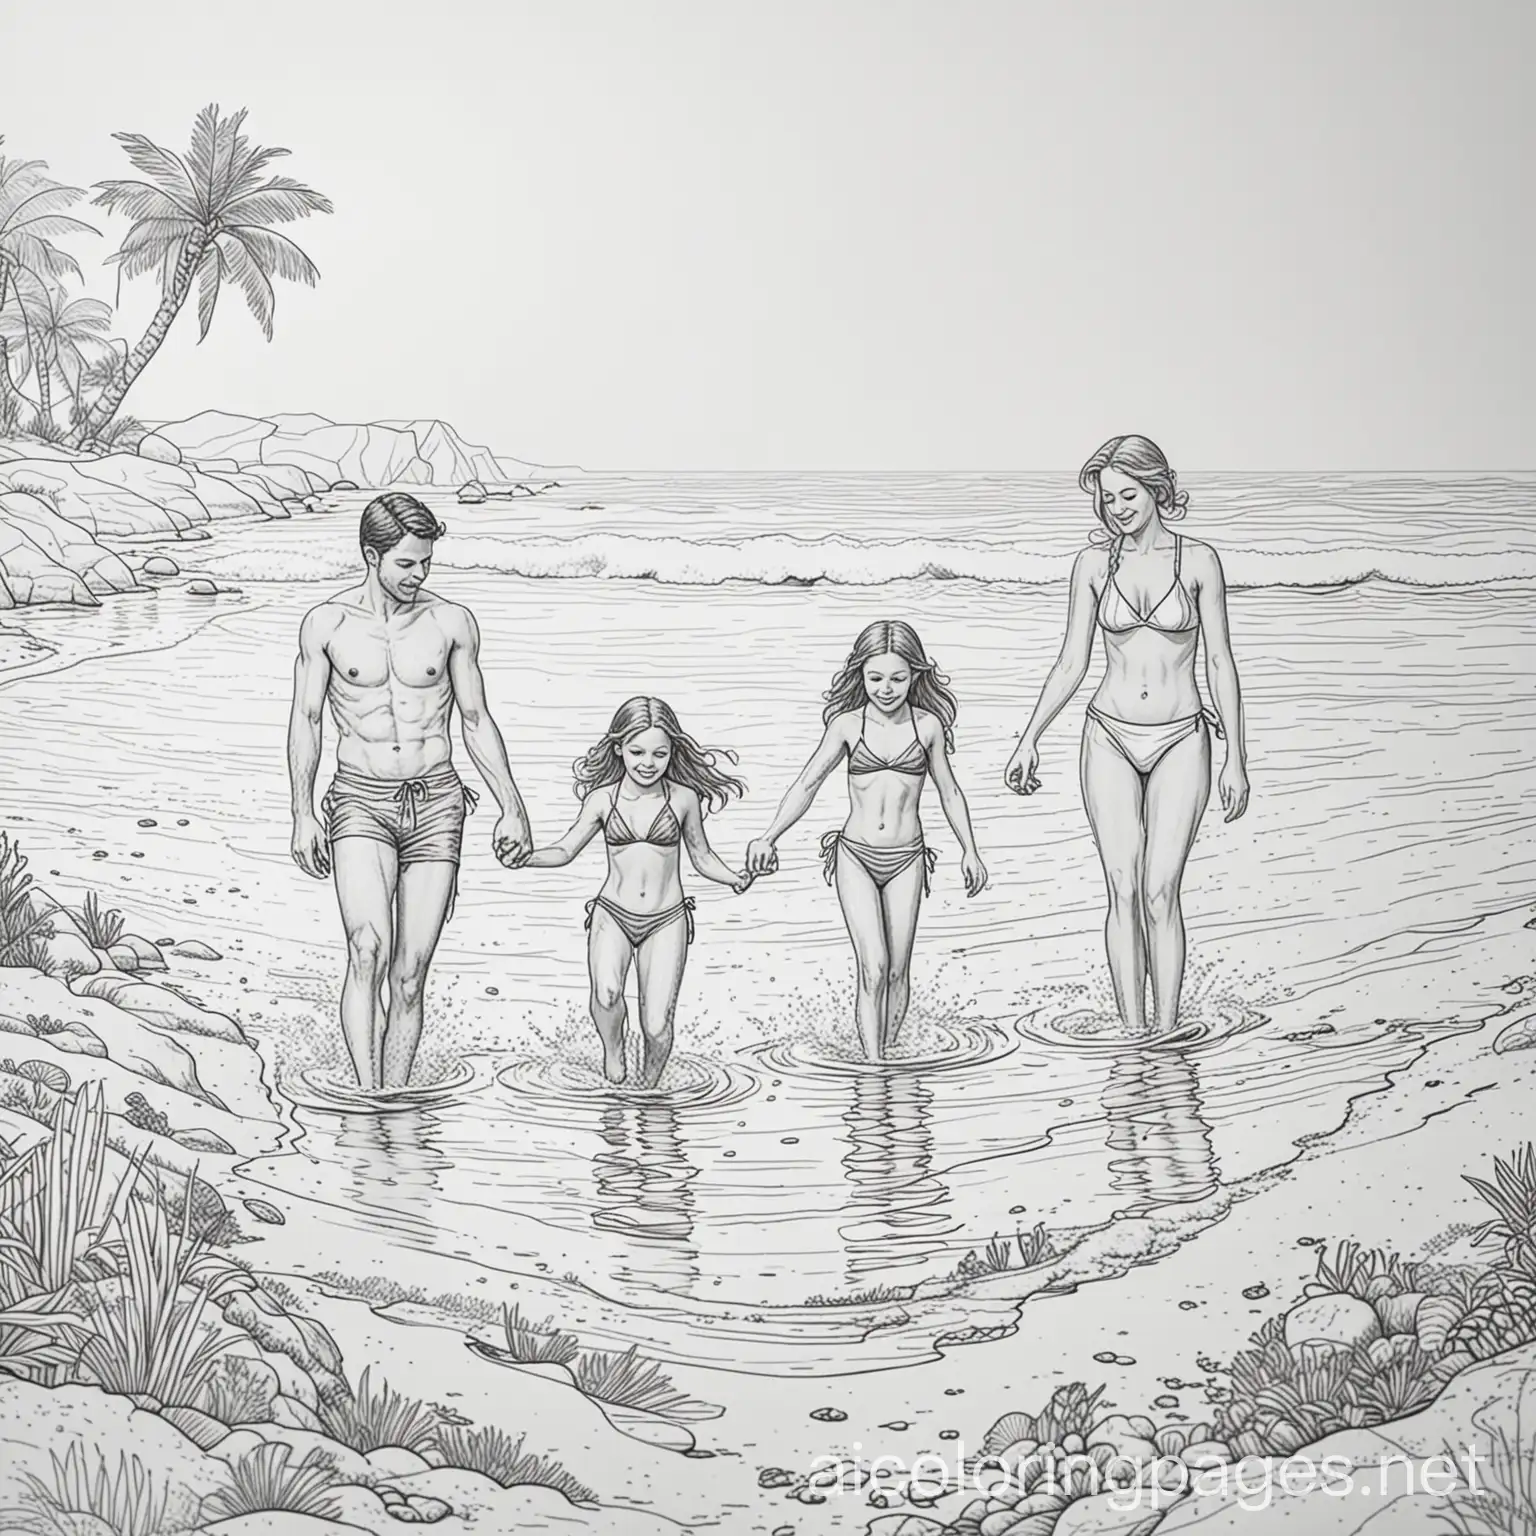 family swimming in a beach
, Coloring Page, black and white, line art, white background, Simplicity, Ample White Space. The background of the coloring page is plain white to make it easy for young children to color within the lines. The outlines of all the subjects are easy to distinguish, making it simple for kids to color without too much difficulty